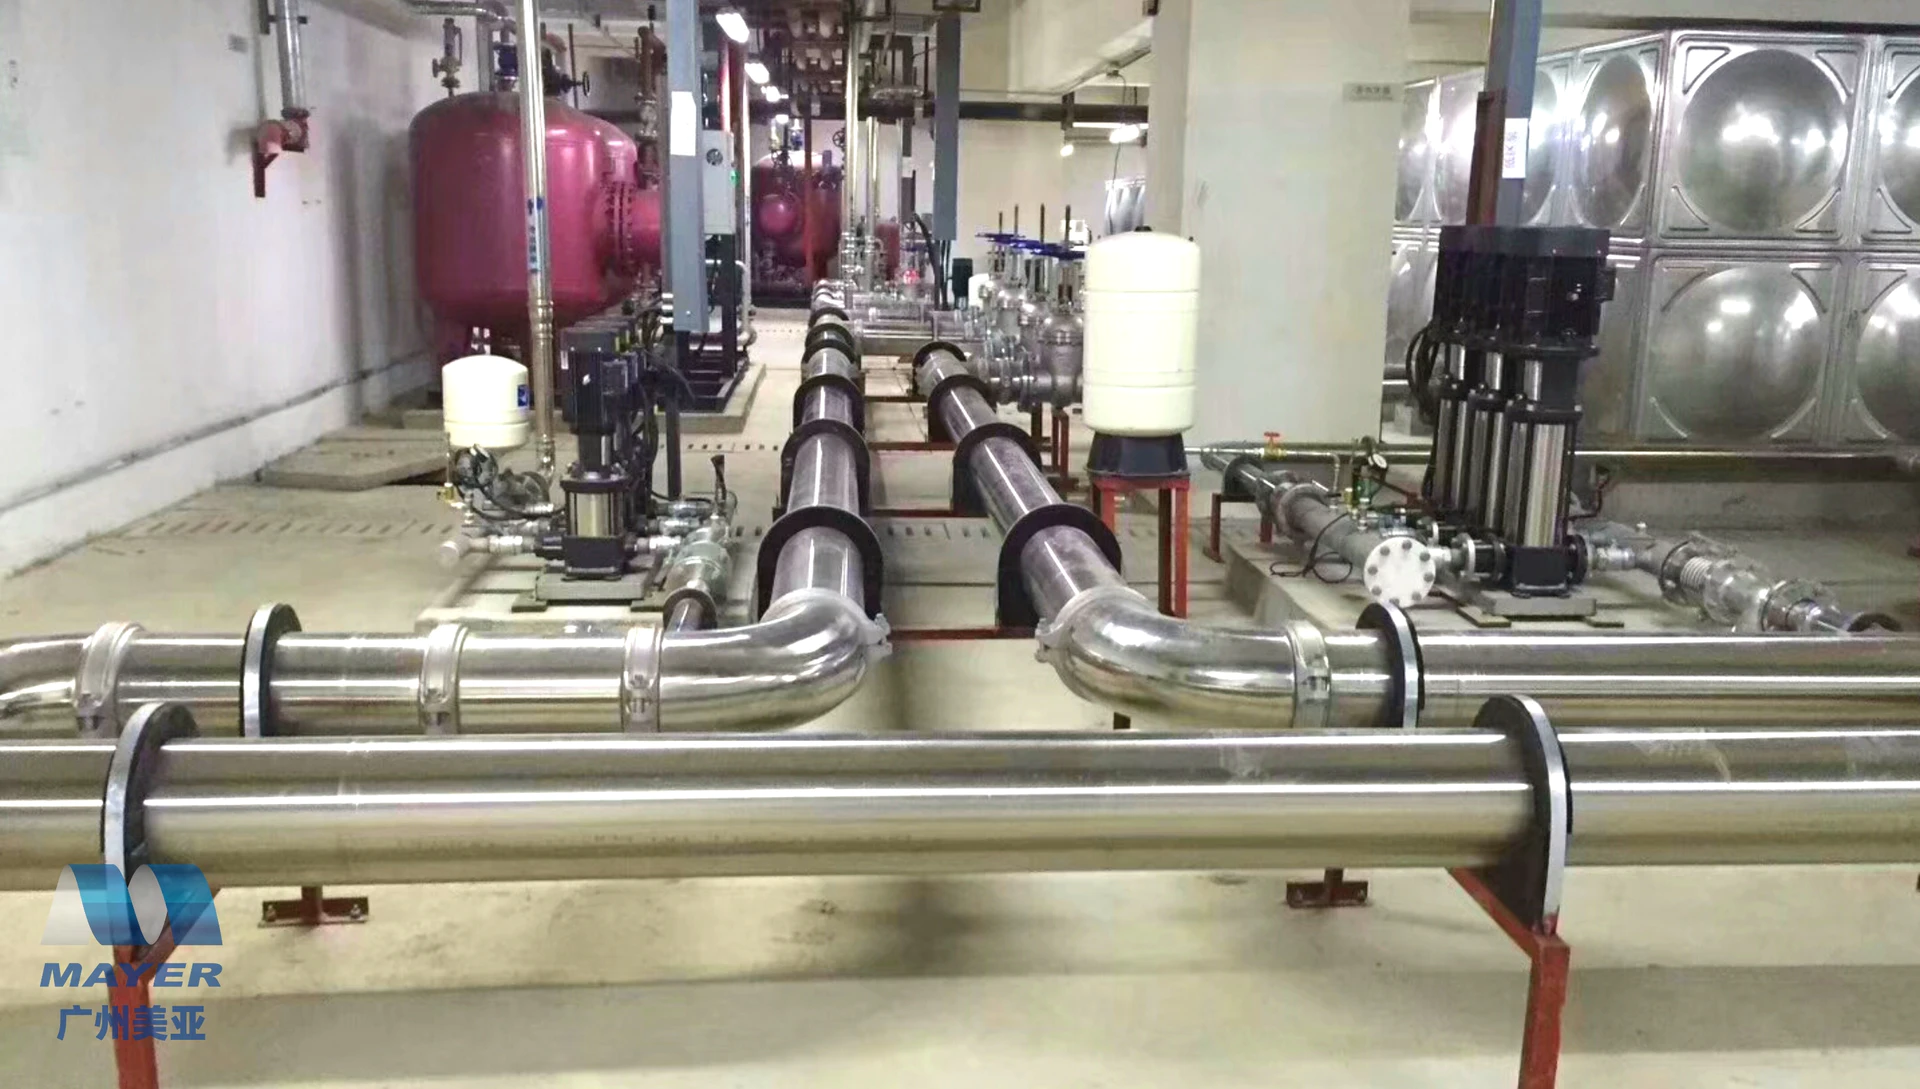 High quality no leakage risk stainless steel pipe and press tee fitting application on pine connection